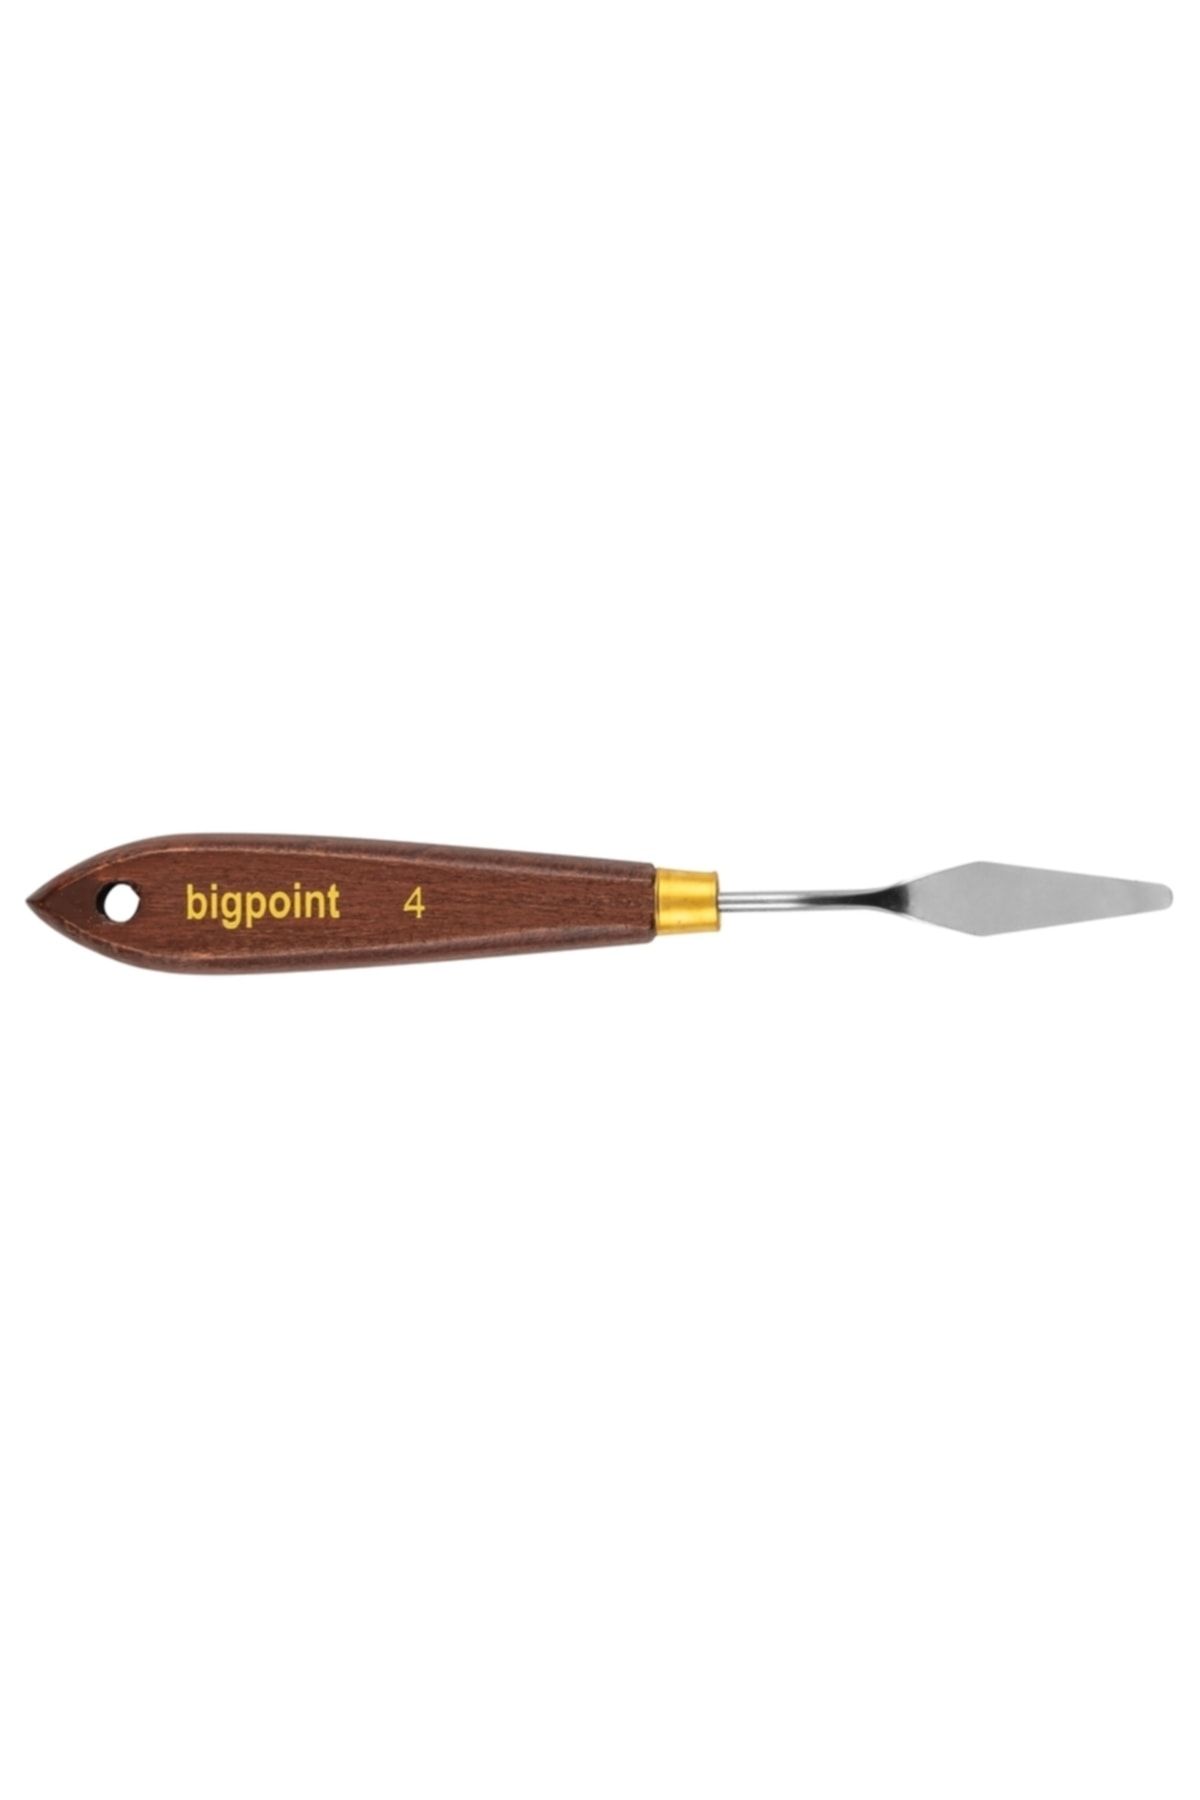 Bigpoint Metal Spatula No: 4 (painting Knife) 1 Adet